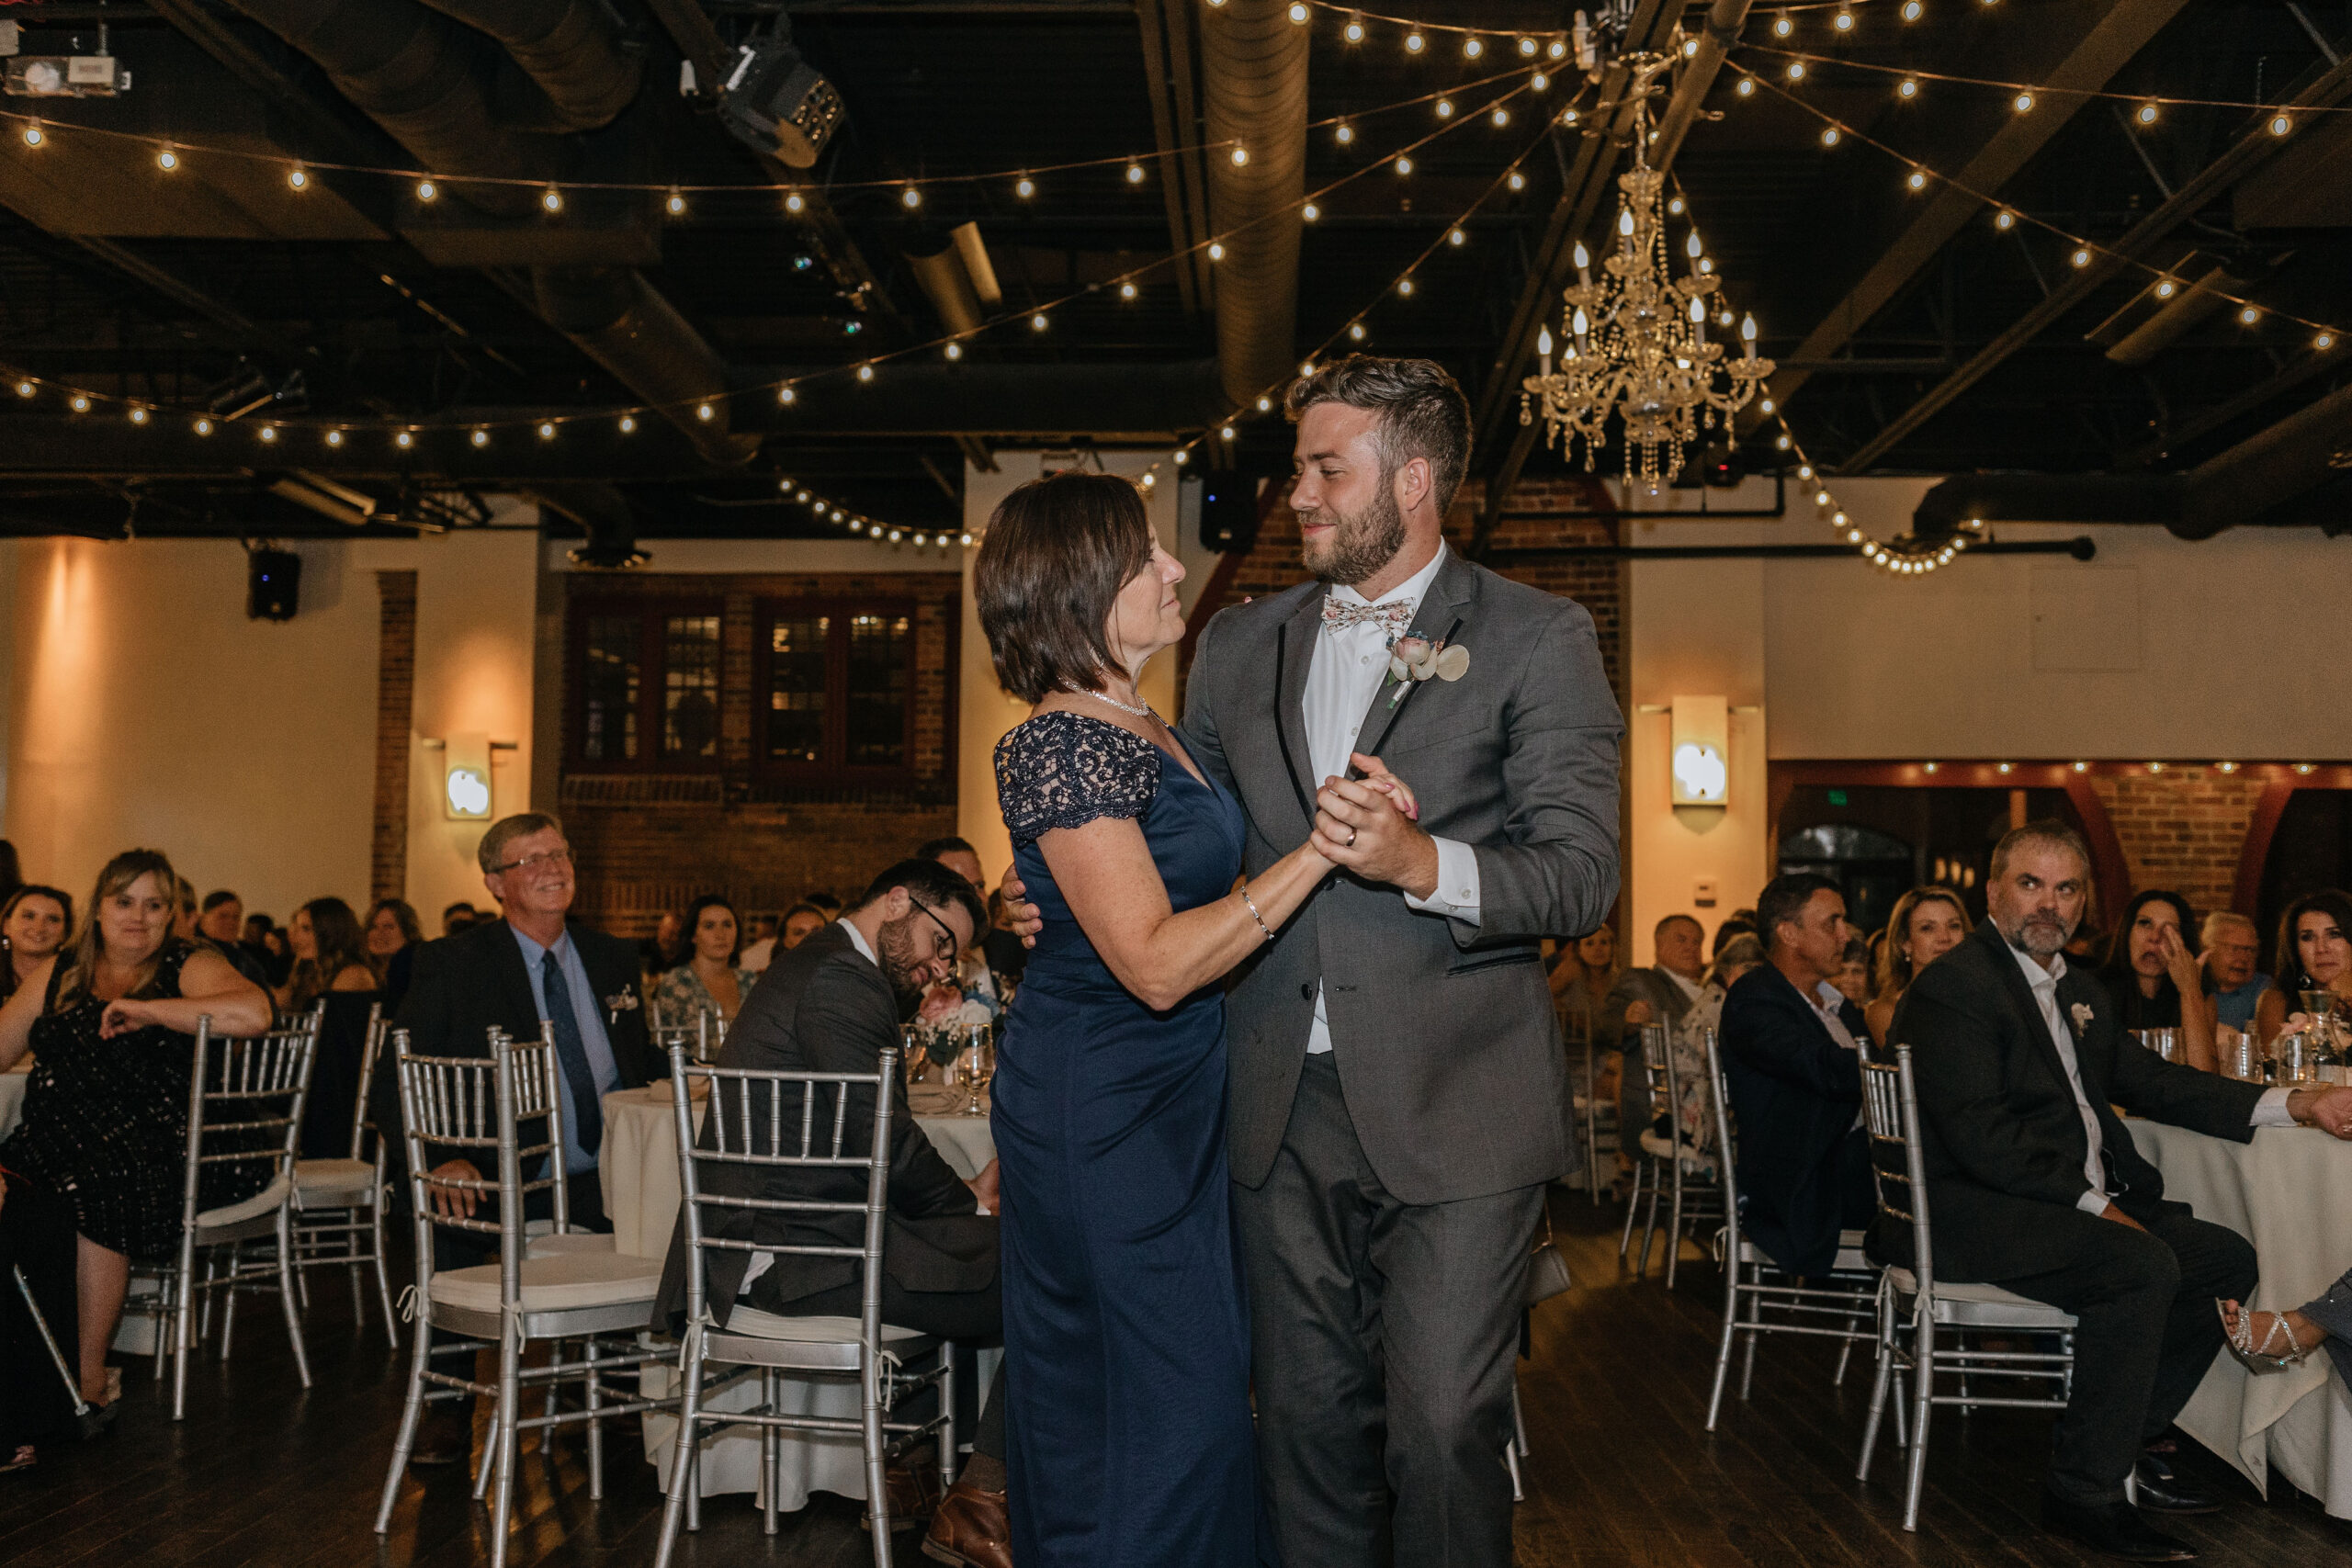 mother and son dance wedding